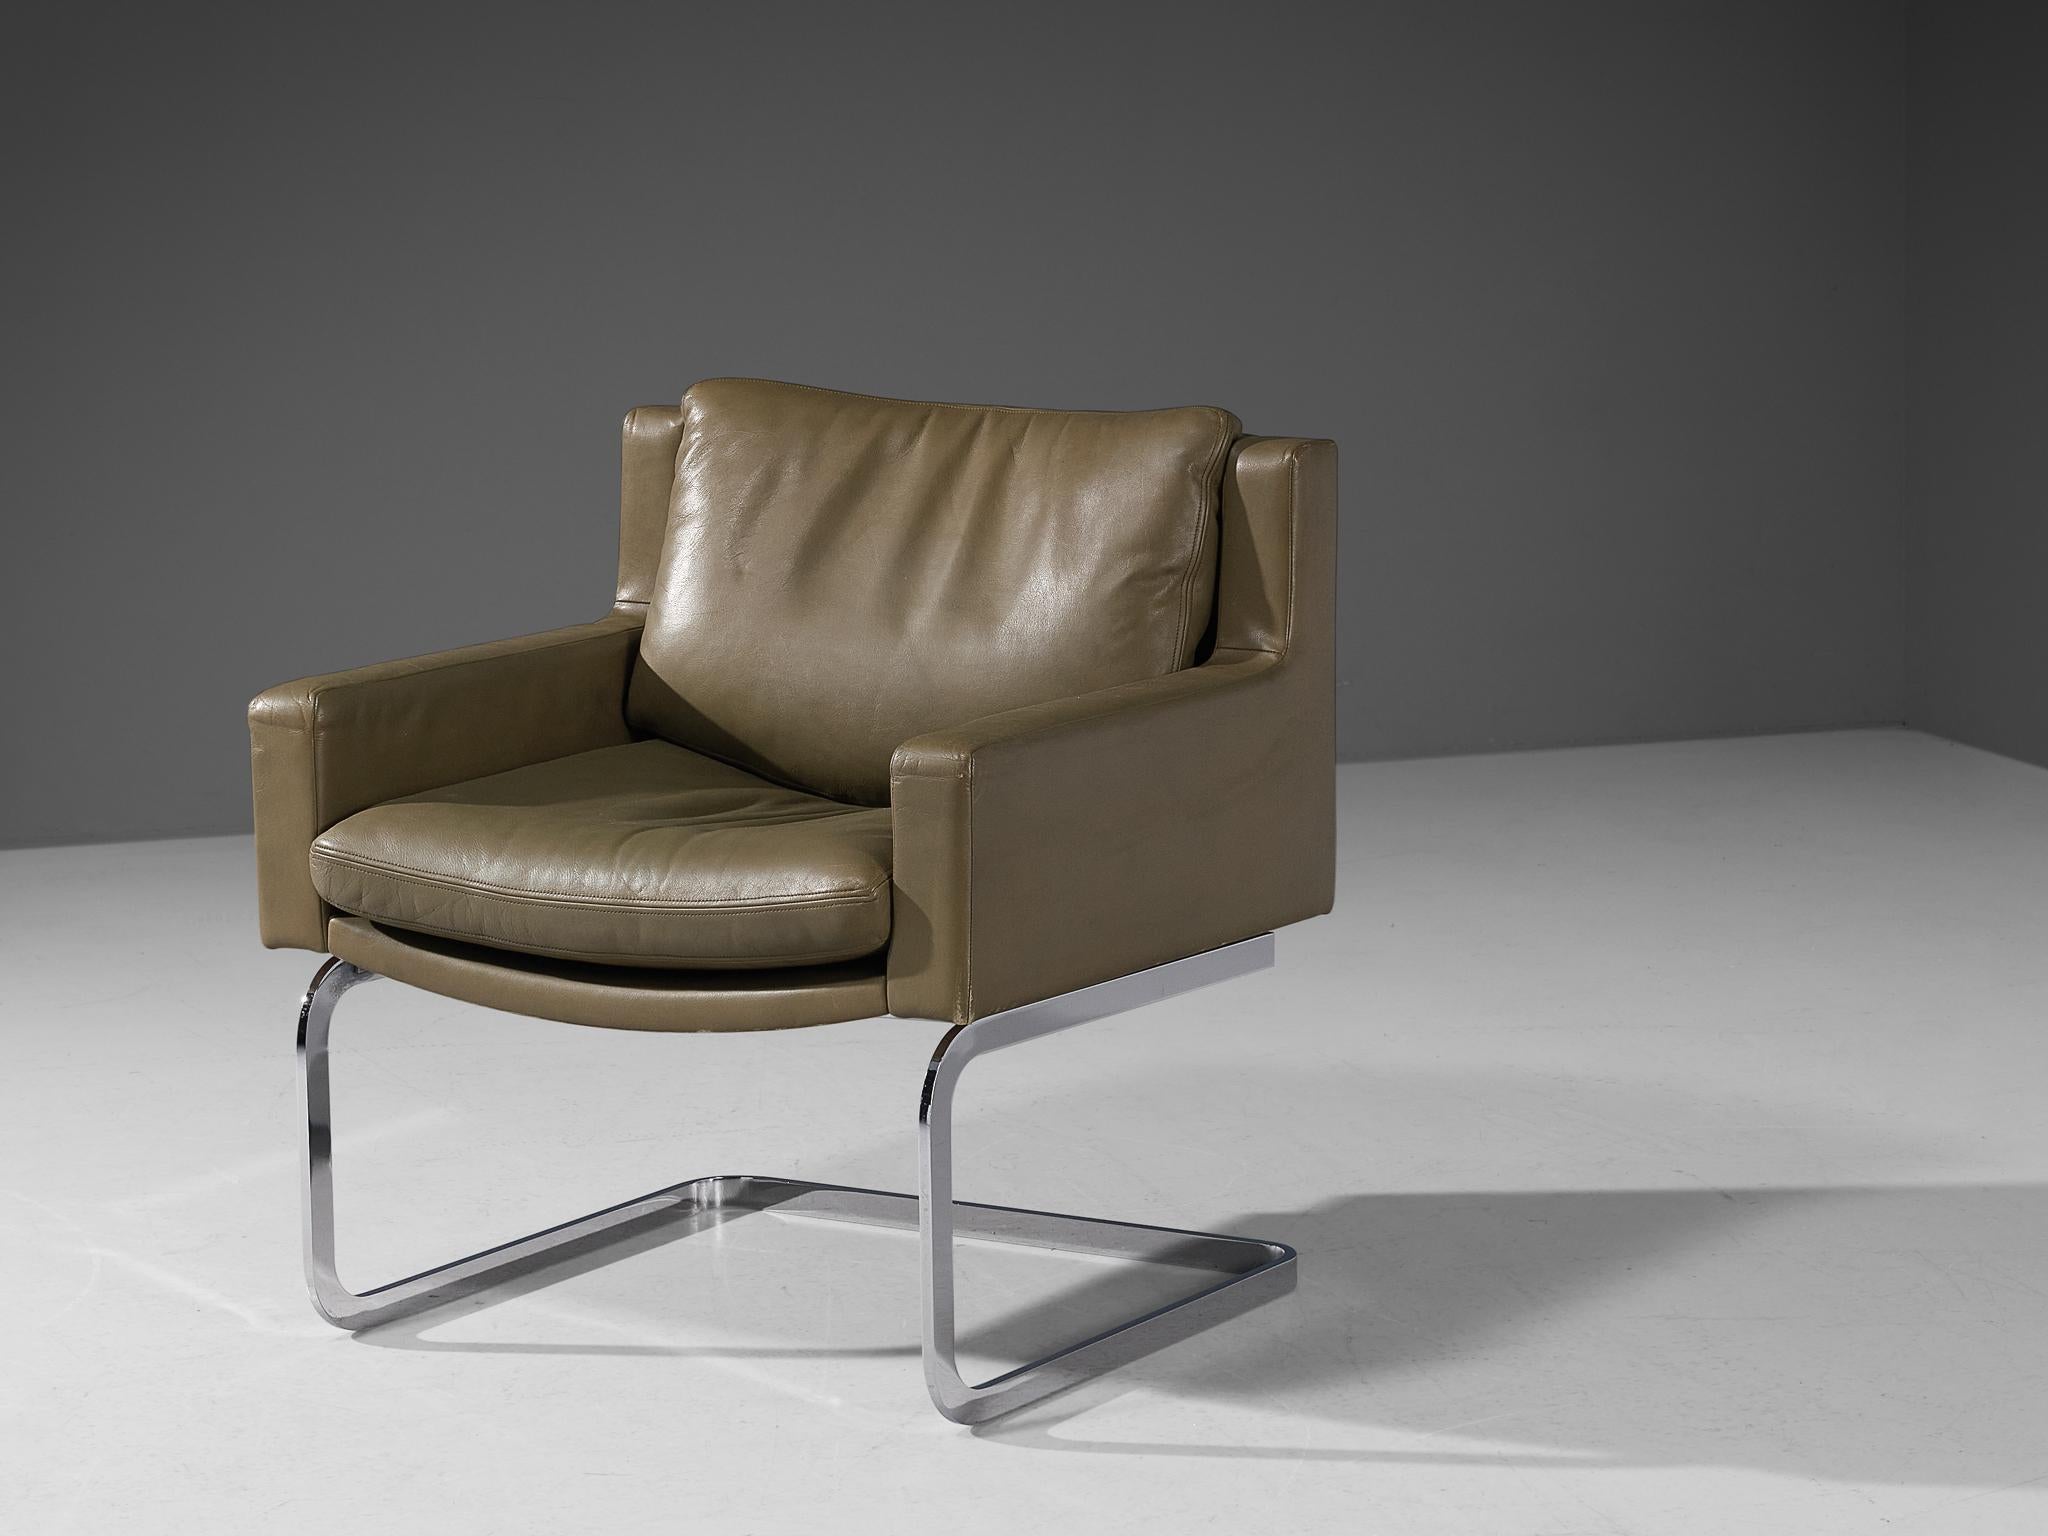 Robert Haussmann for De Sede, armchair model 'DS-201', chrome-plated metal, leather, Switzerland, designed in 1957 

A design by Robert Haussmann that features a cubic shaped structure. The backrest runs into the armrests by means of a